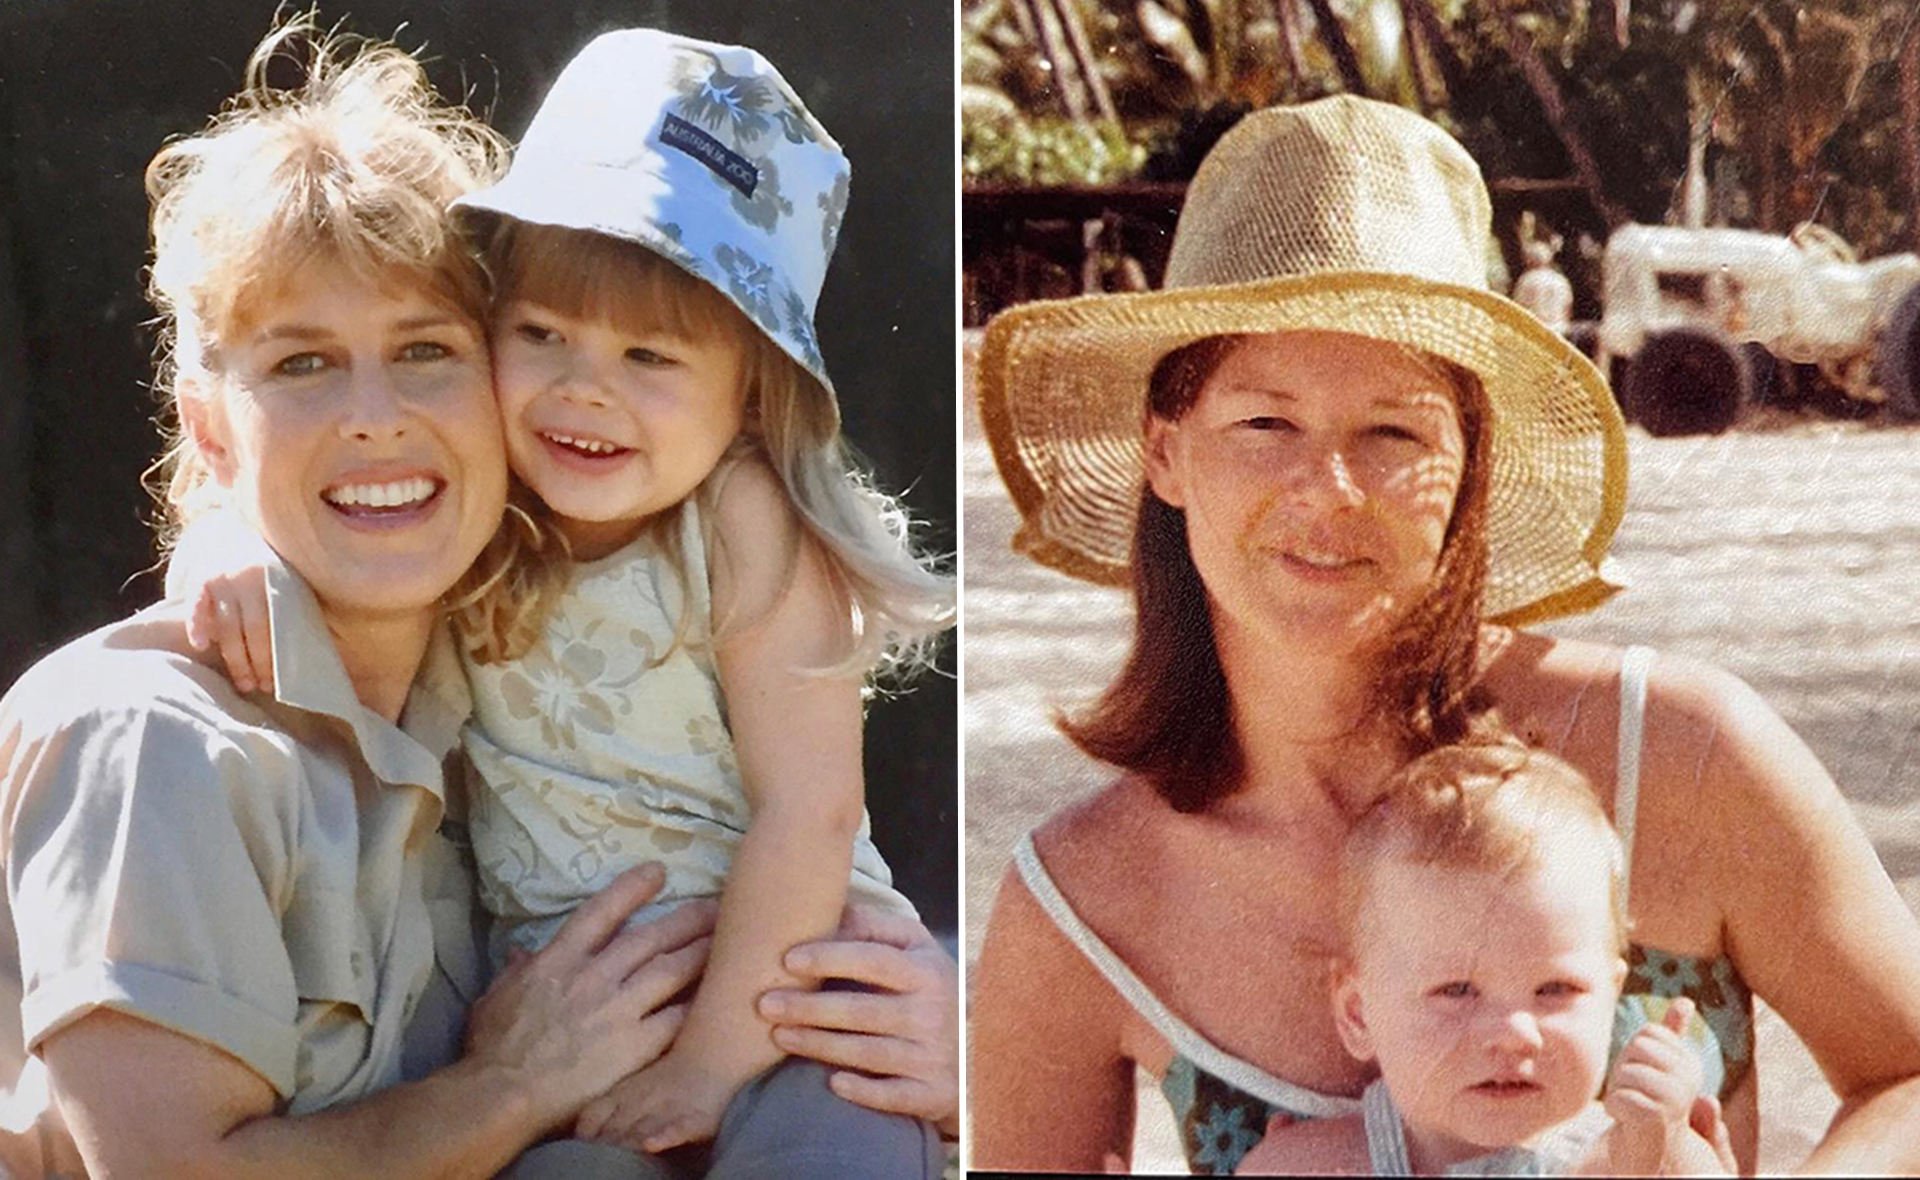 Aussie stars are unrecognisable in these Mother’s Day throwbacks as they celebrate the most important women in their lives